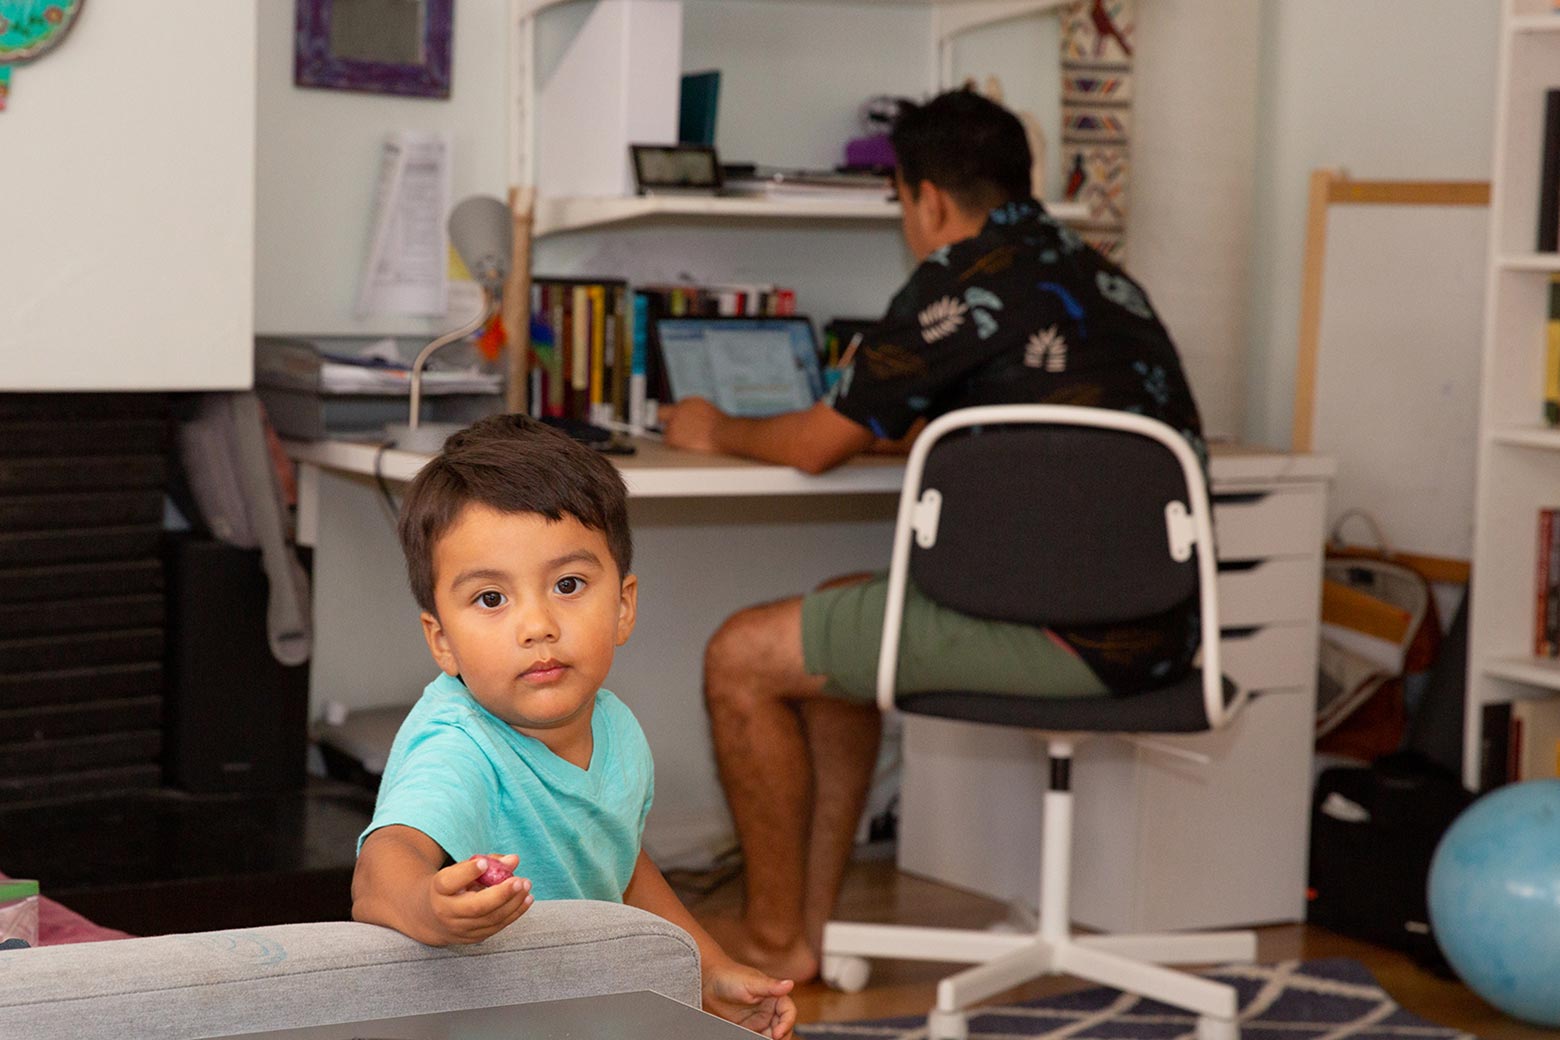 A boy looks toward the camera, reaching forward with a toy in his hand. Behind him, Oscar works on a laptop at a desk.